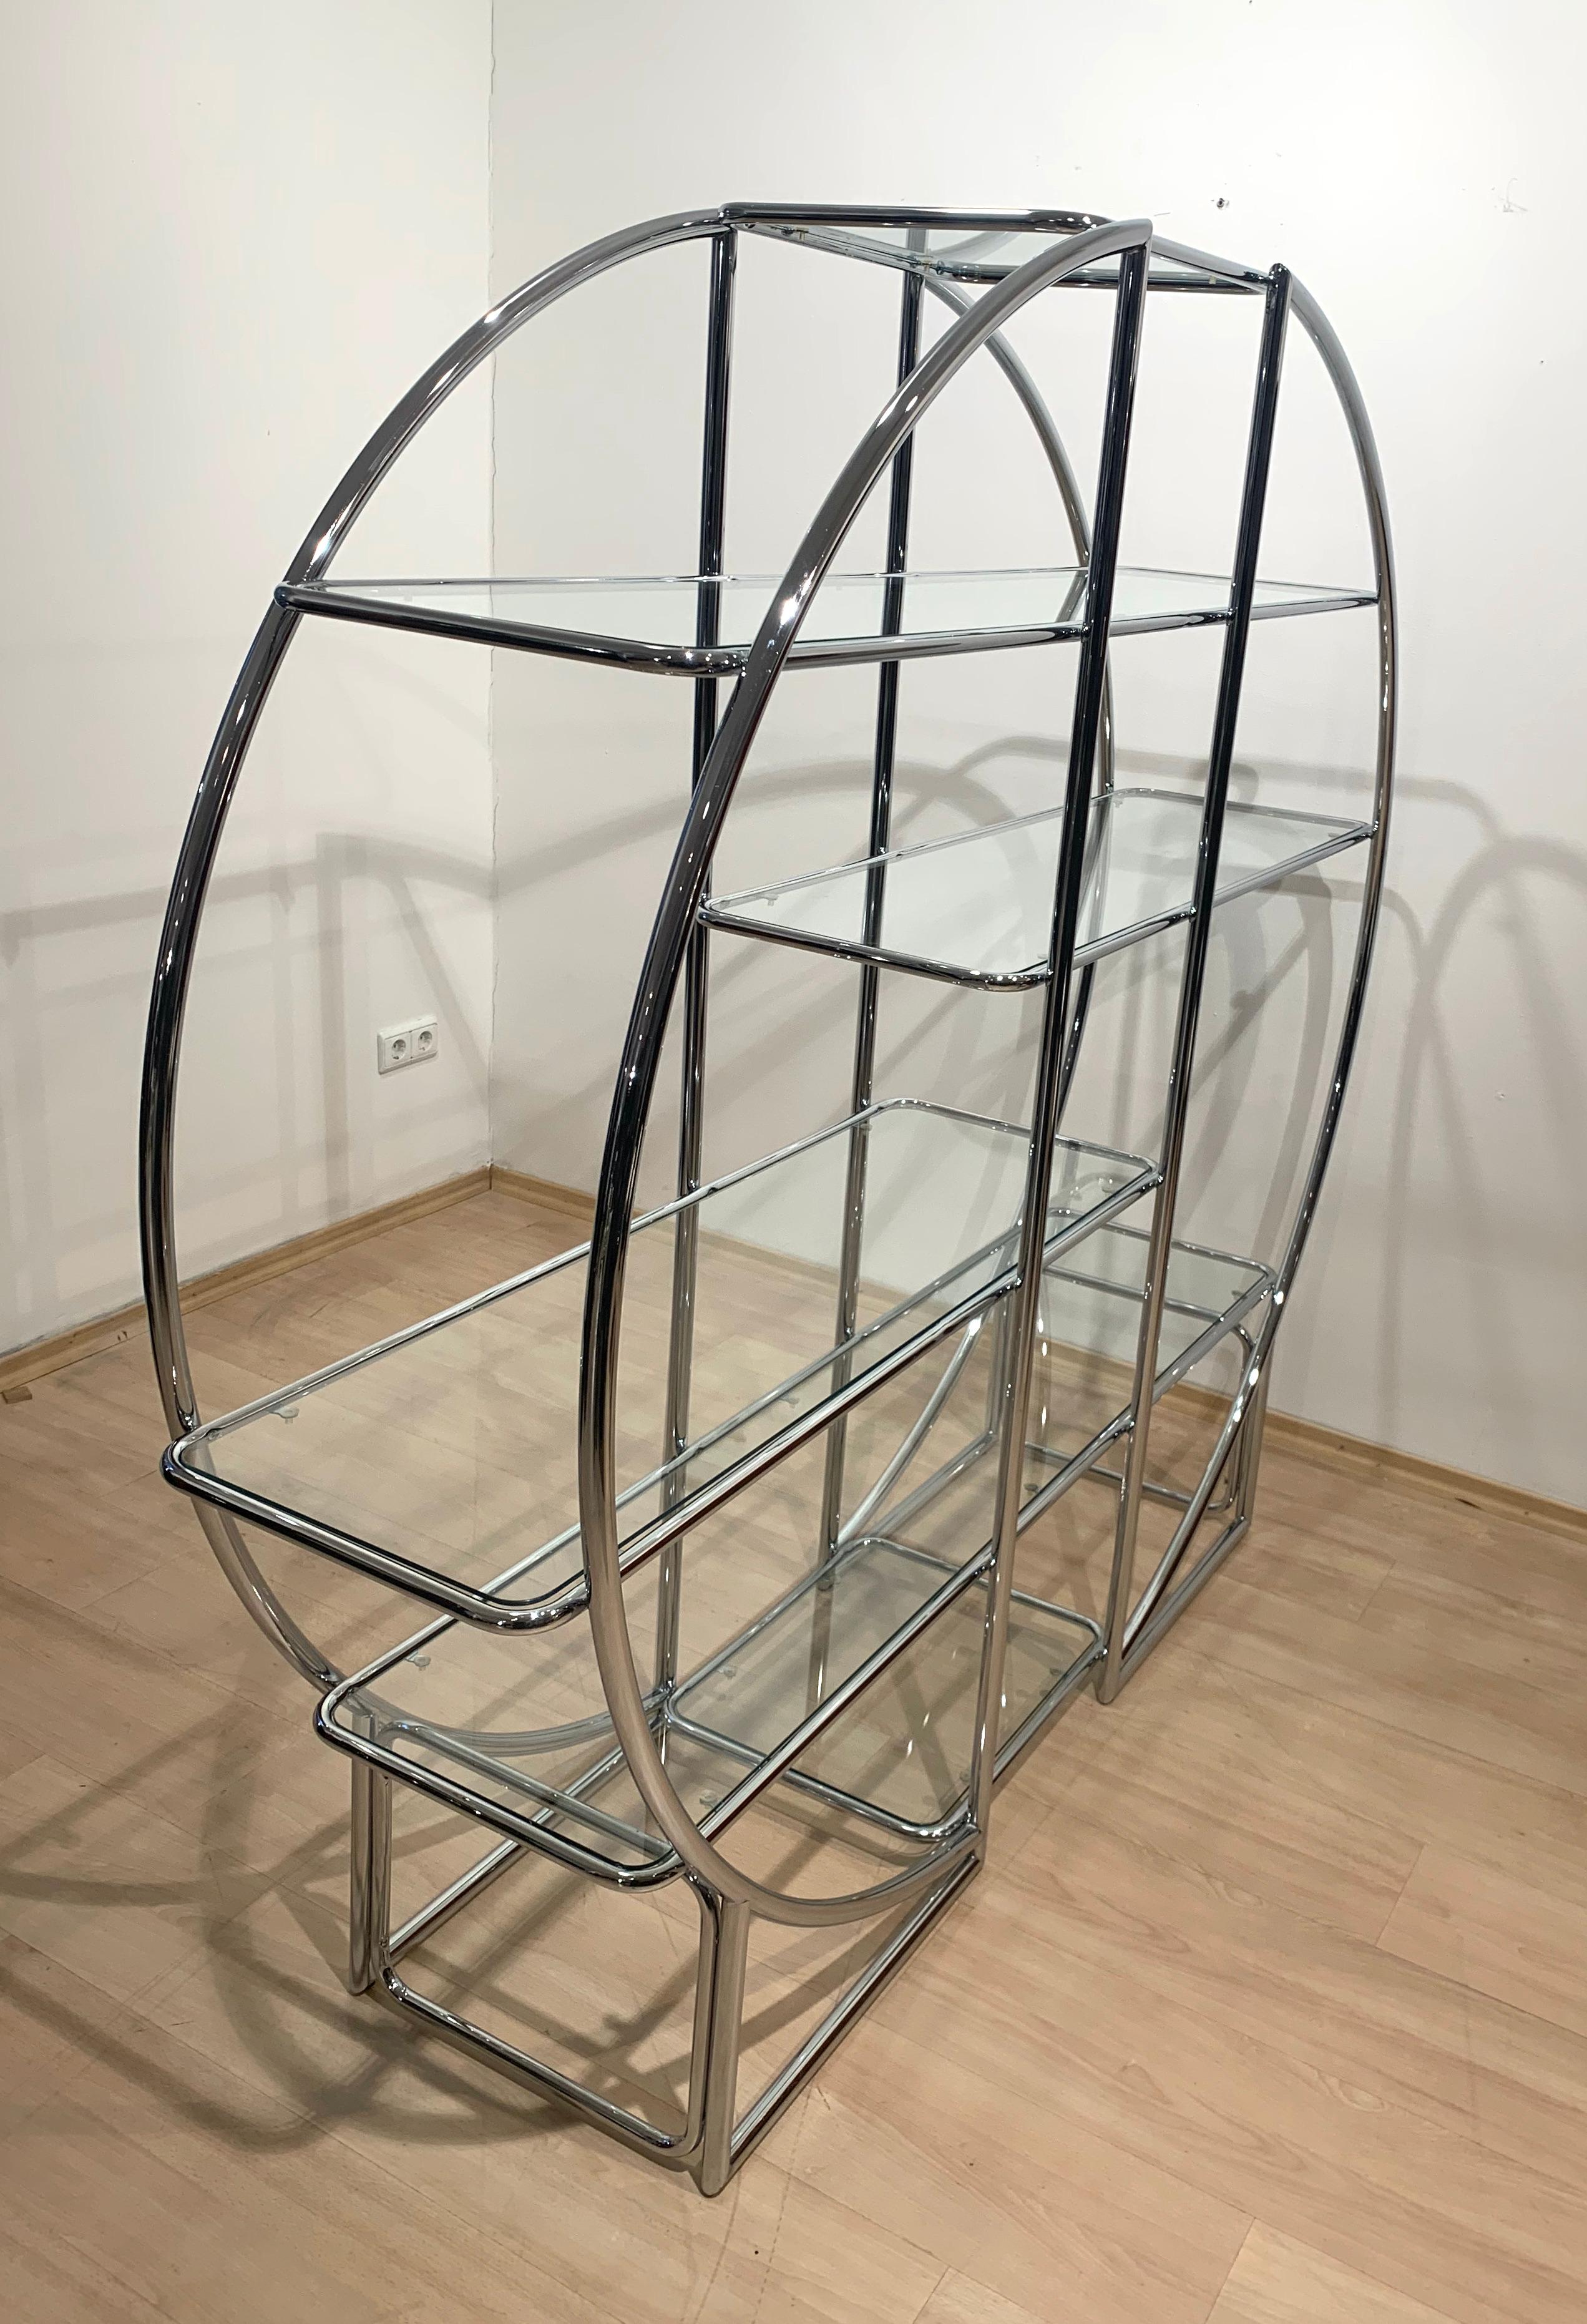 Bauhaus Style Shelf, Chromed Steeltubes and Glass, Germany, 1950-70s For Sale 1